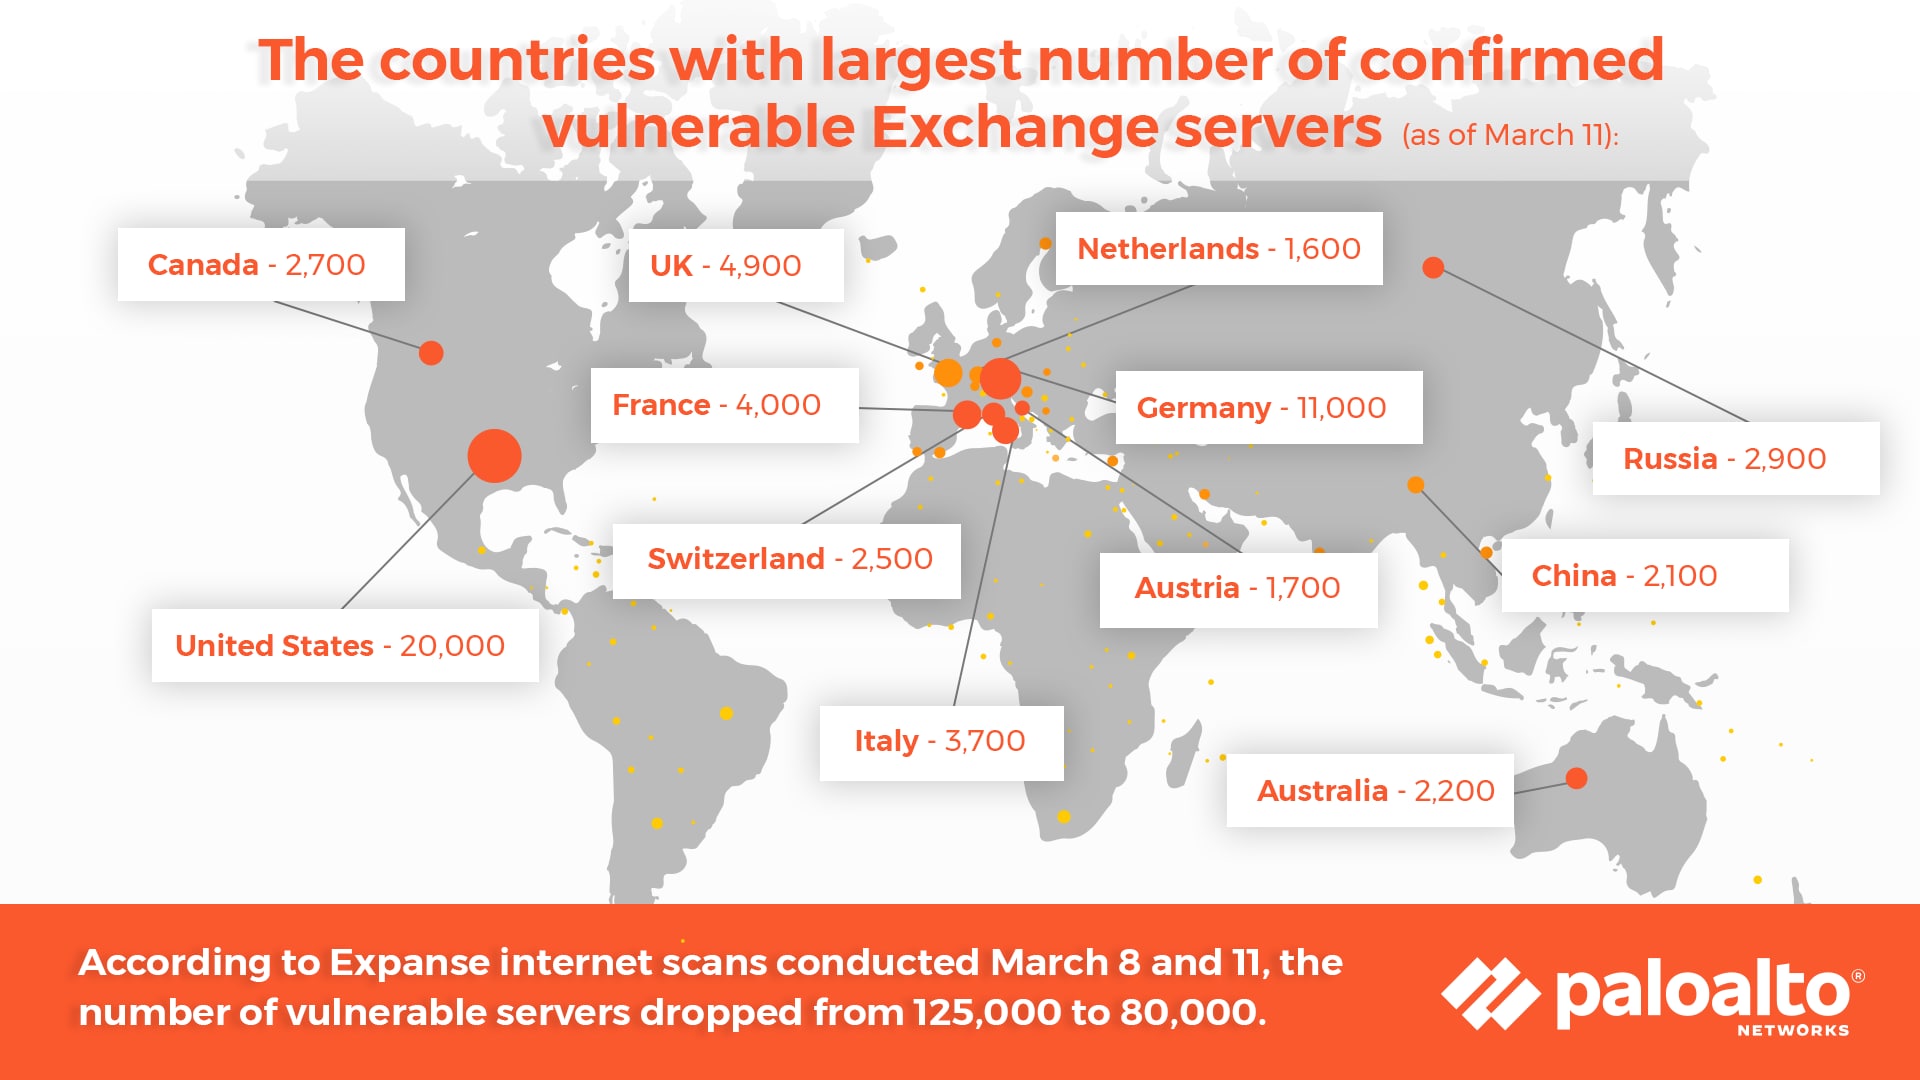 Expanse, an attack surface management platform, gathered data to determine how quickly organizations are patching Microsoft Exchange Servers. The number of unpatched servers dropped from 125,000 on March 8 to 80,000 on March 11. The map shows blue dots indicating the quantity of unpatched servers in the countries surveyed as of March 11. Countries with the most unpatched Exchange Servers were the US with 20,000; Germany with 11,000; the UK with 4,900; France with 4,000; Italy with 3,700; Russia with 2,900; Canada with 2,700; Switzerland with 2,500; Australia with 2,200; China with 2,100; Austria with 1,700; and the Netherlands with 1,600. 